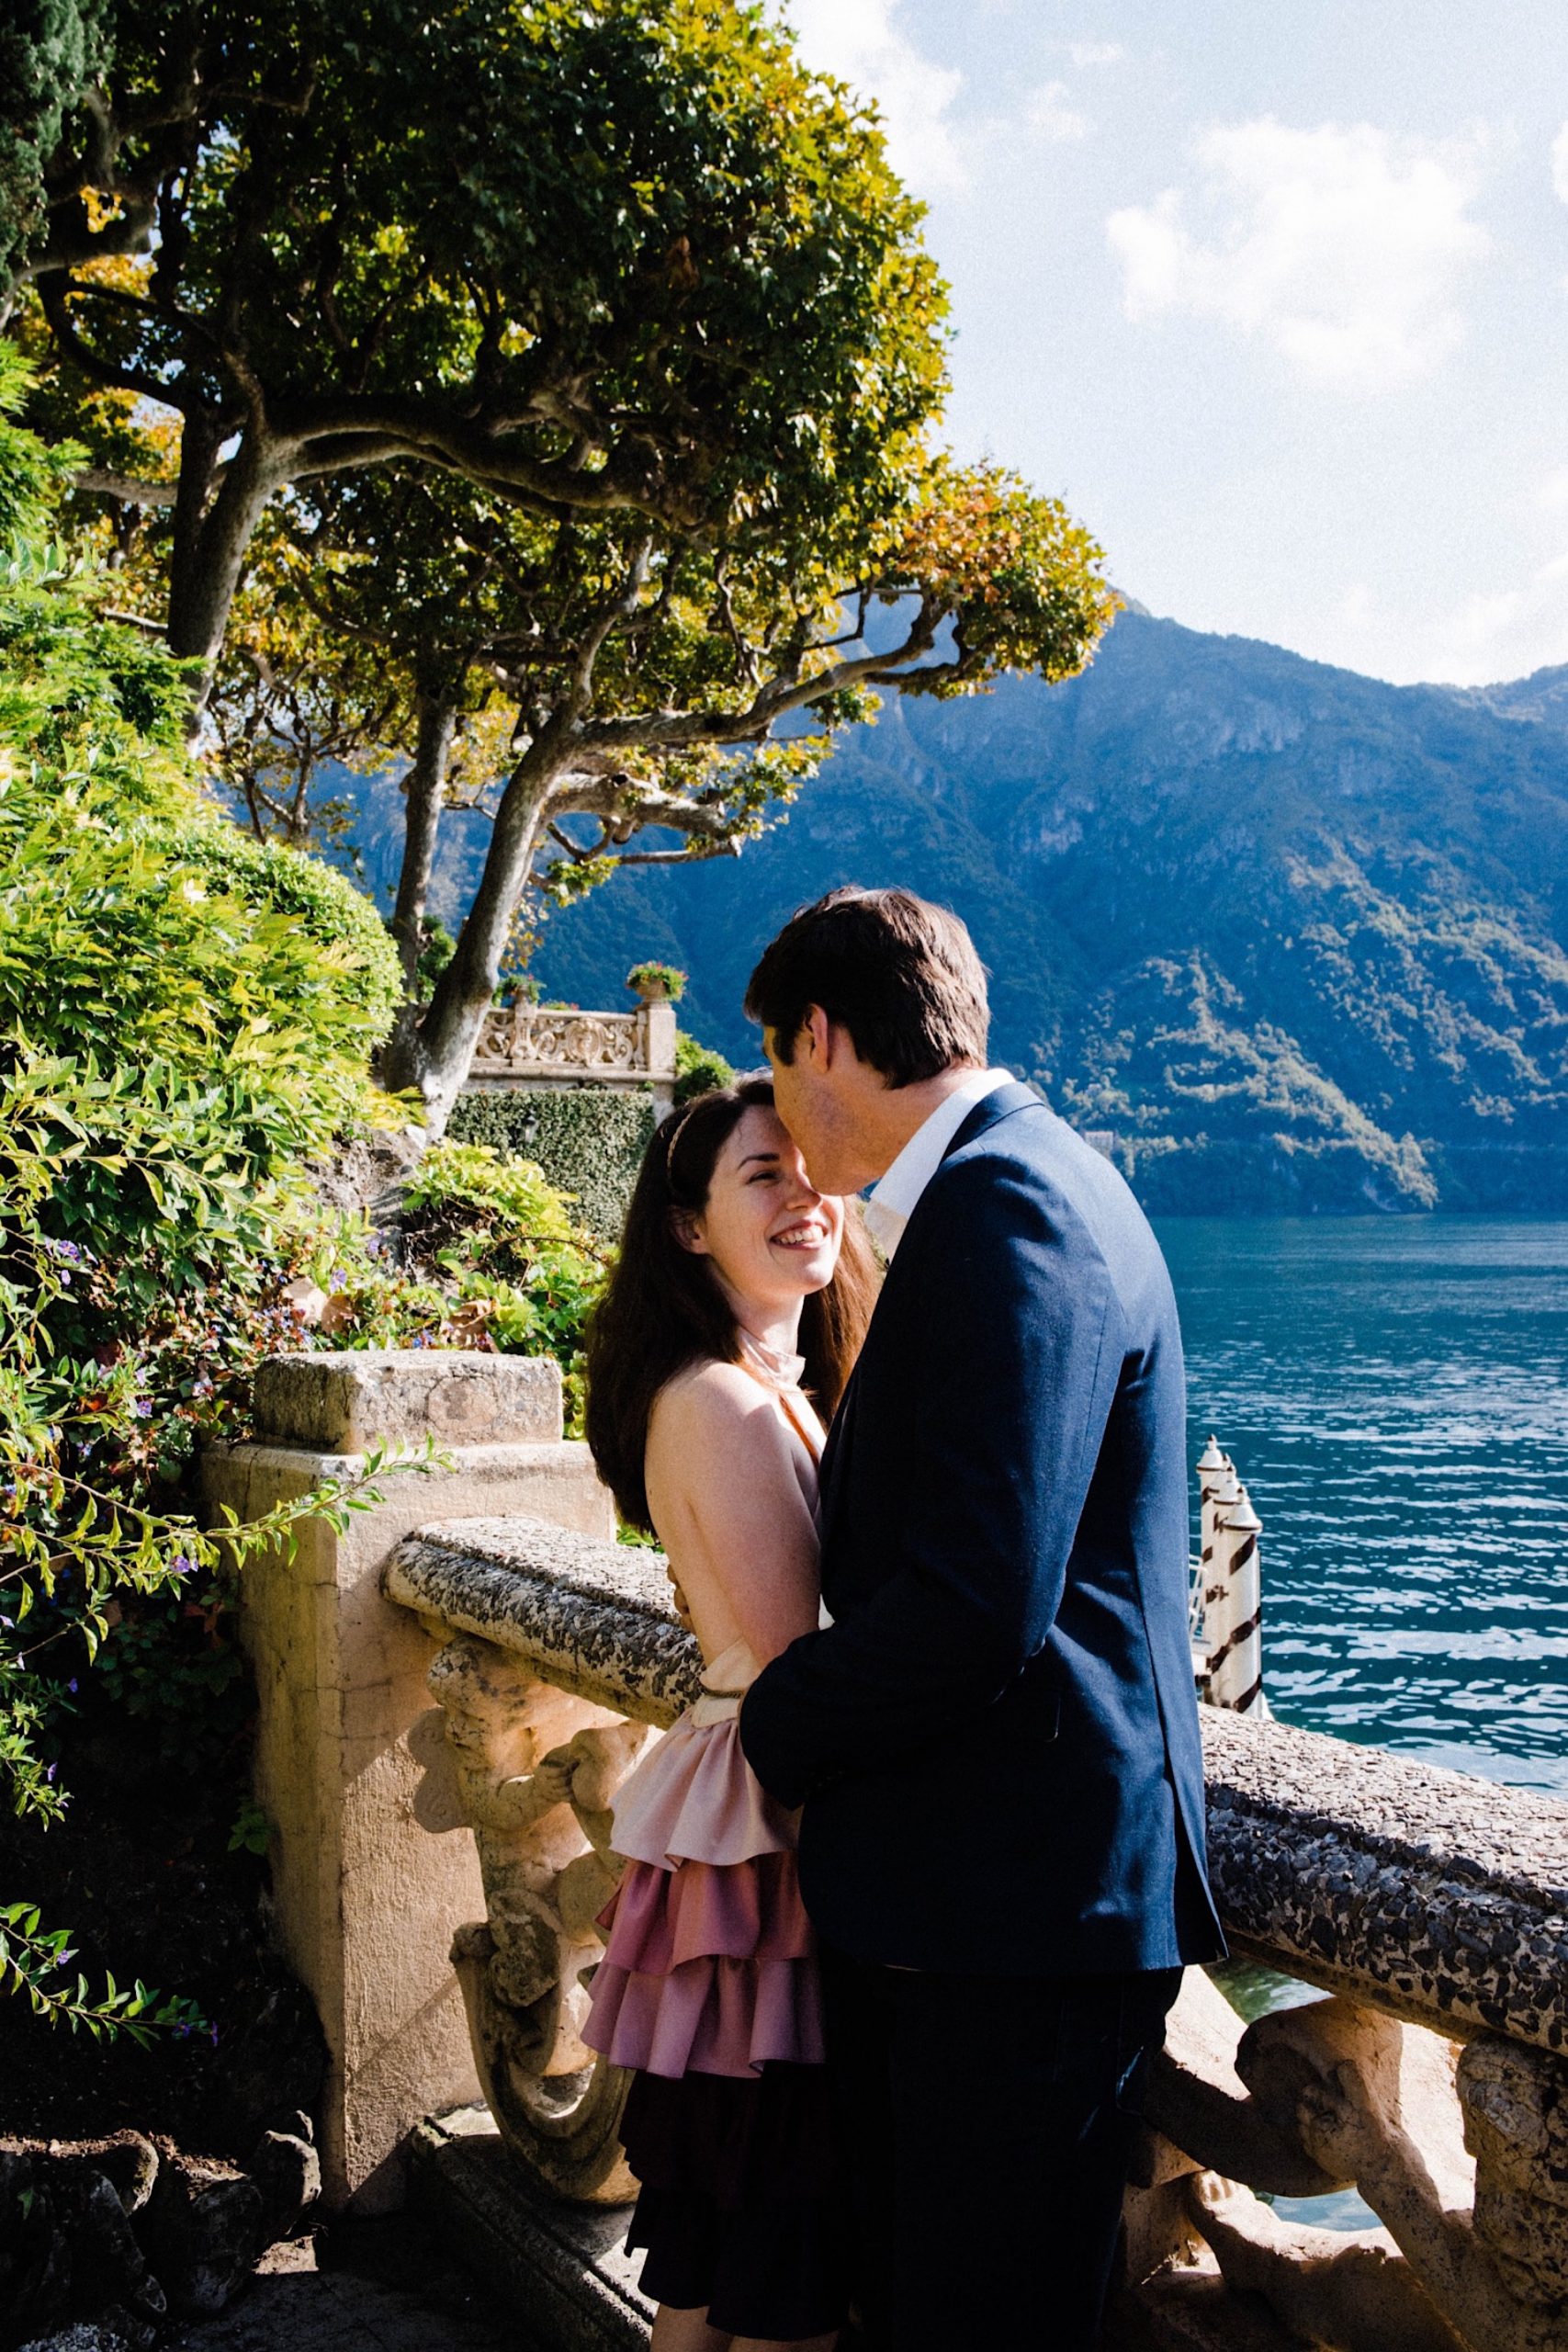 A portrait photo of a couple leaning against stone balustrades at Villa Balbianello, with gardens on one side and Lake Como on the other.